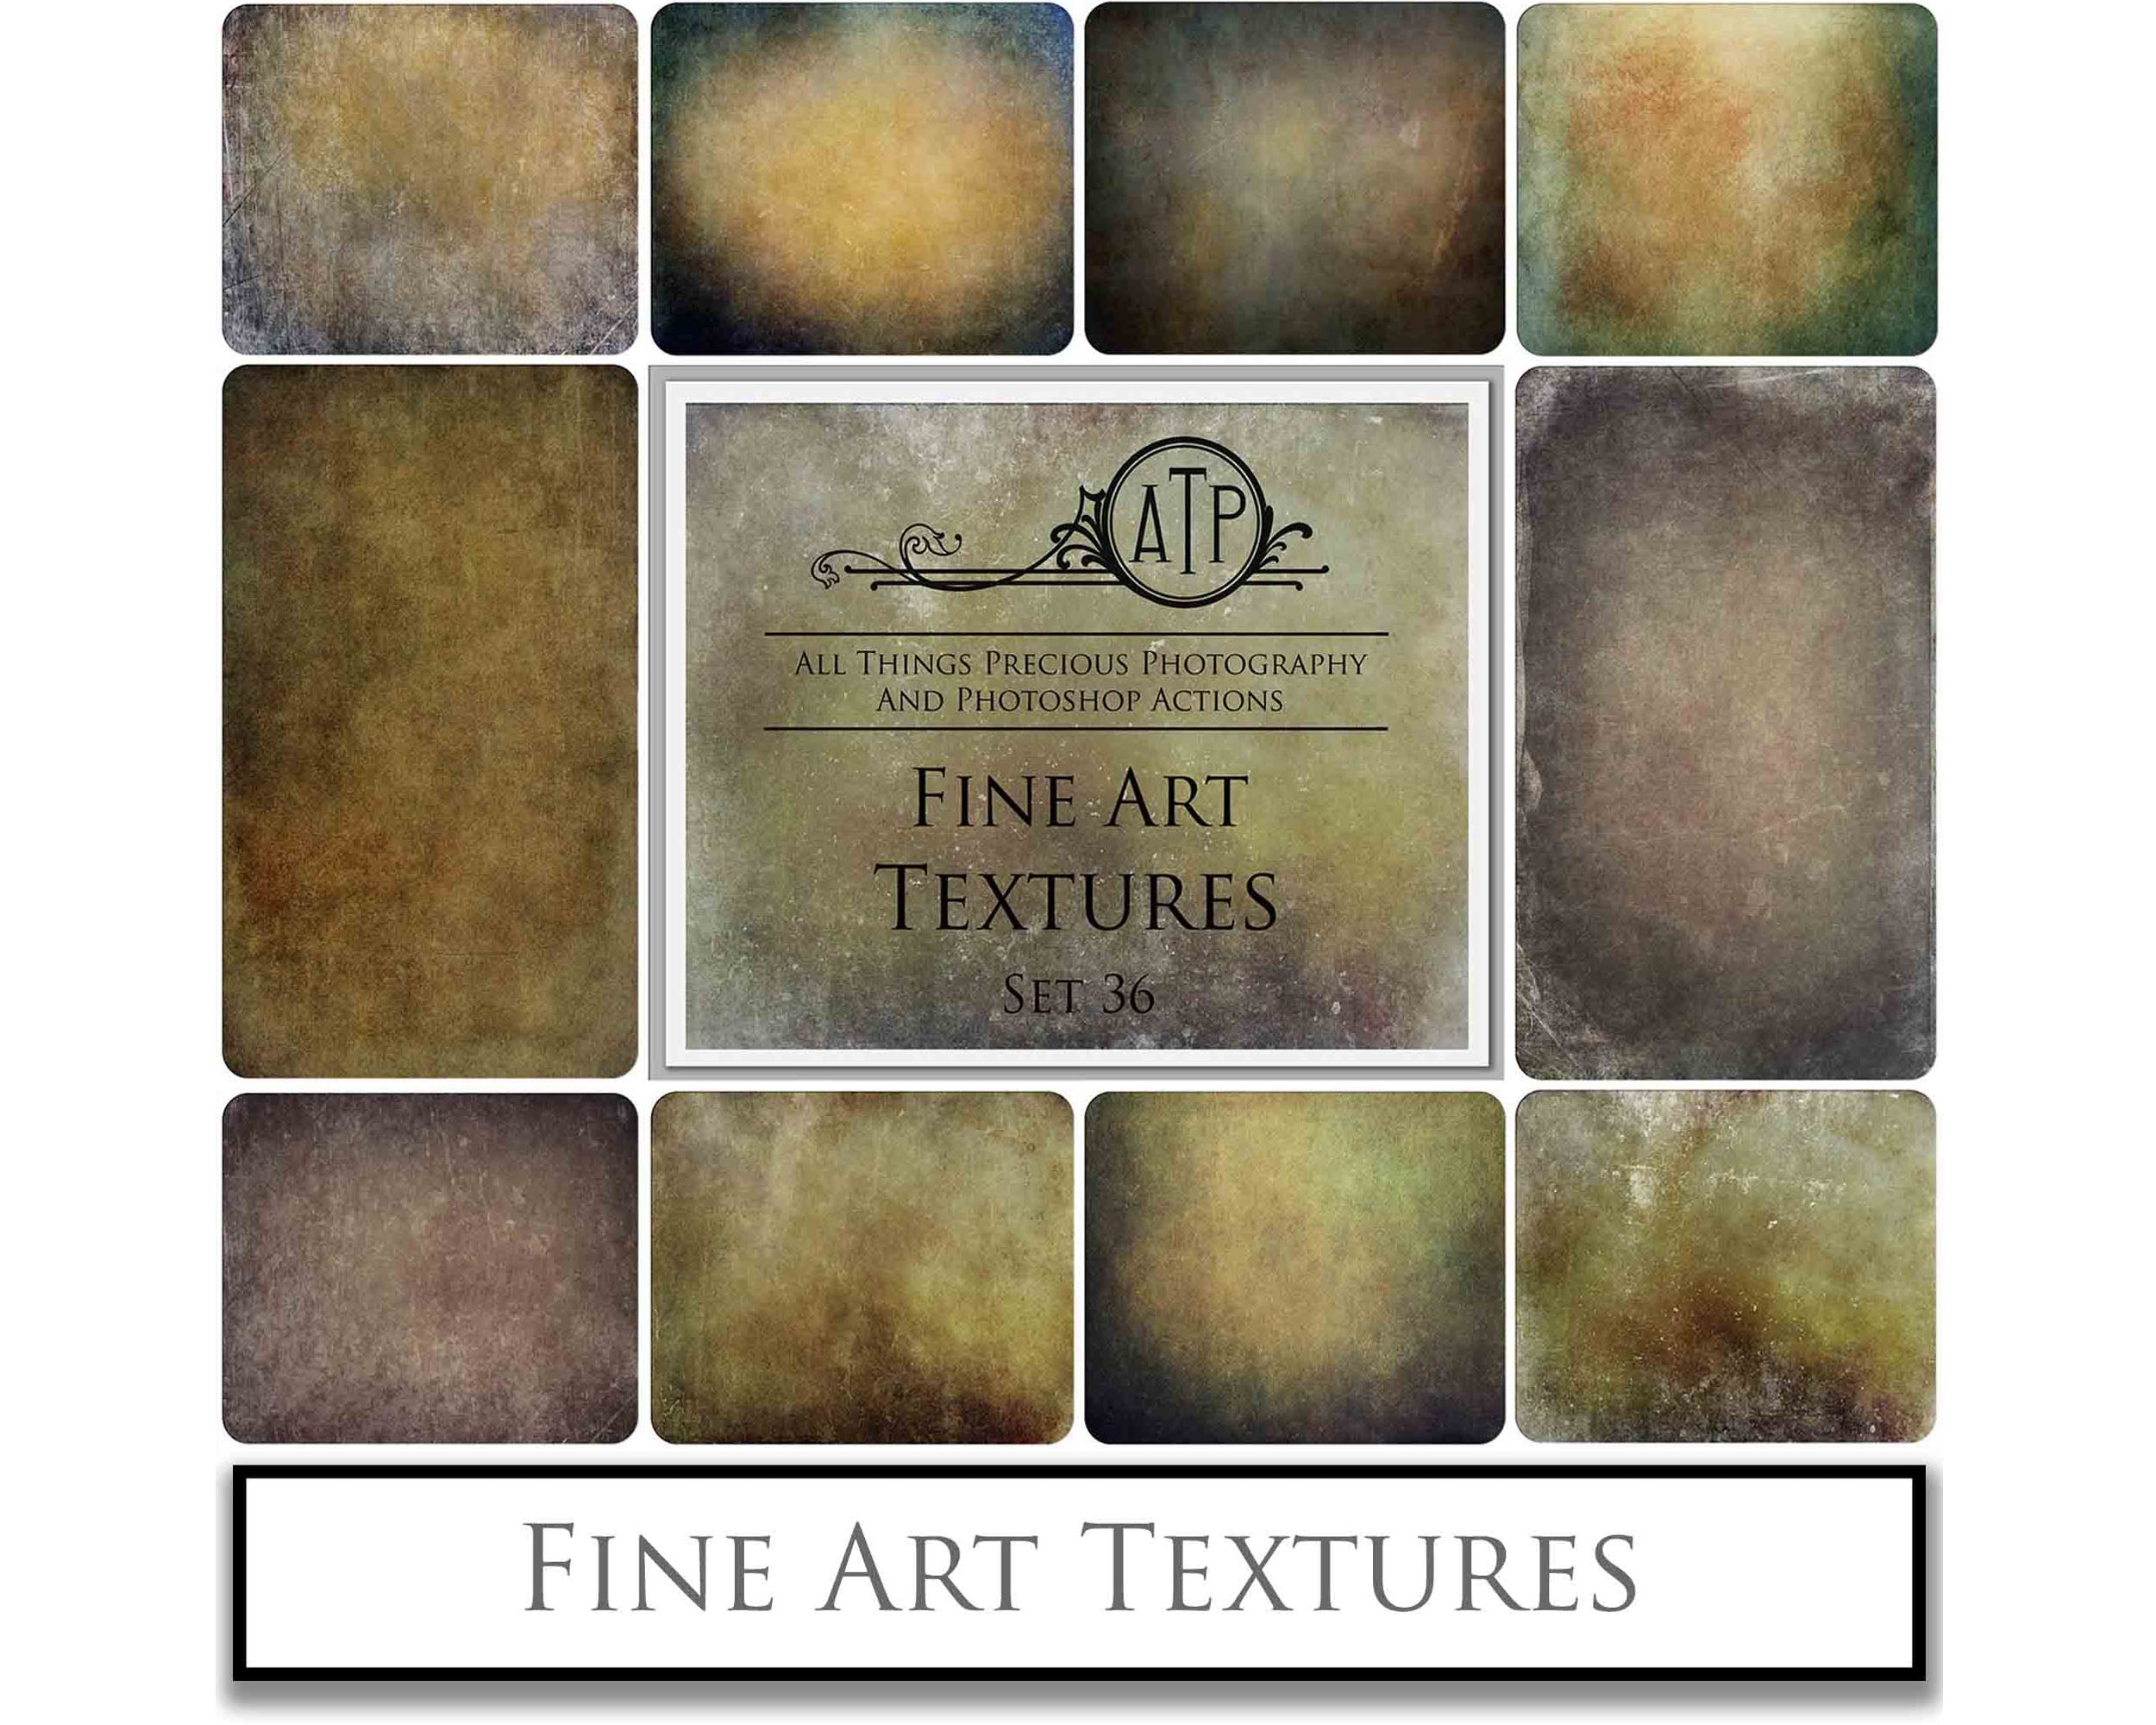 Fine art textures for photographers, digital editing. Photo Overlays. Antique, Vintage, Grunge, Light, Bundle. Textured printable Canvas, Colour, black and white, Bundle. High resolution, 300dpi Graphic Assets for photography, scrapbooking and design. By ATP Textures